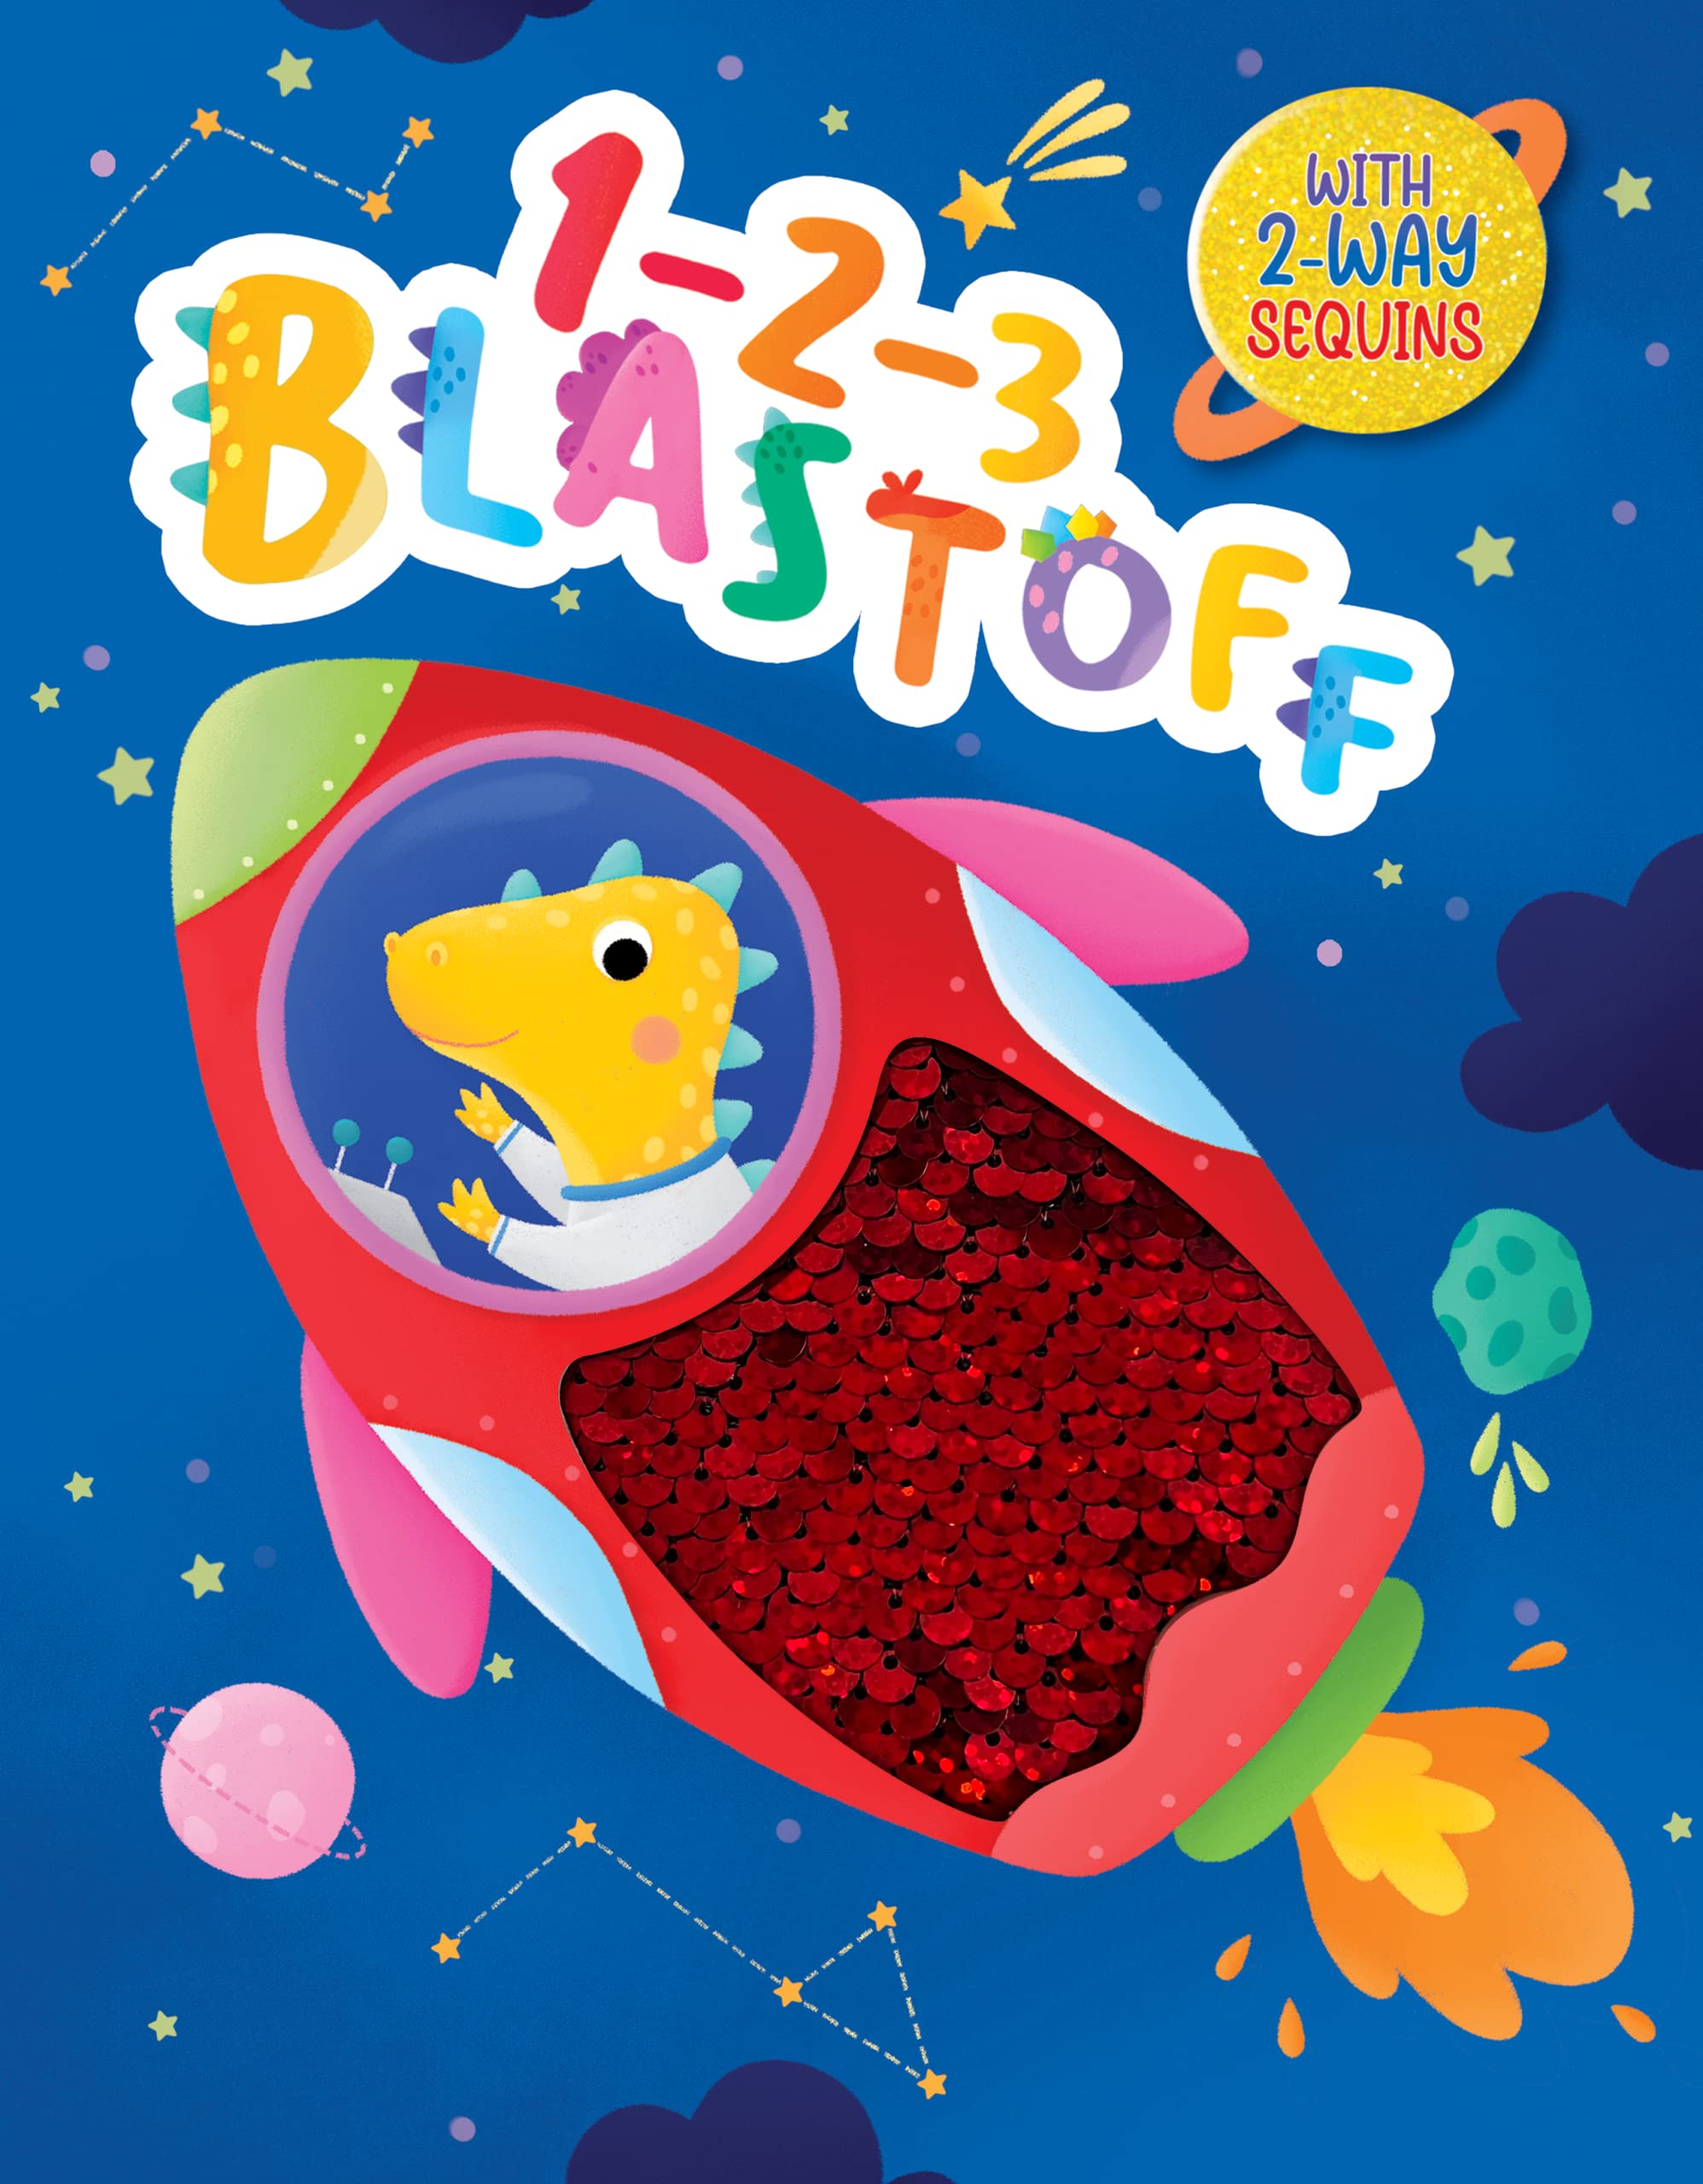 1-2-3 Blastoff - Children's Touch and Feel Storybook with 2-Way Sequins - Sensory Board Book